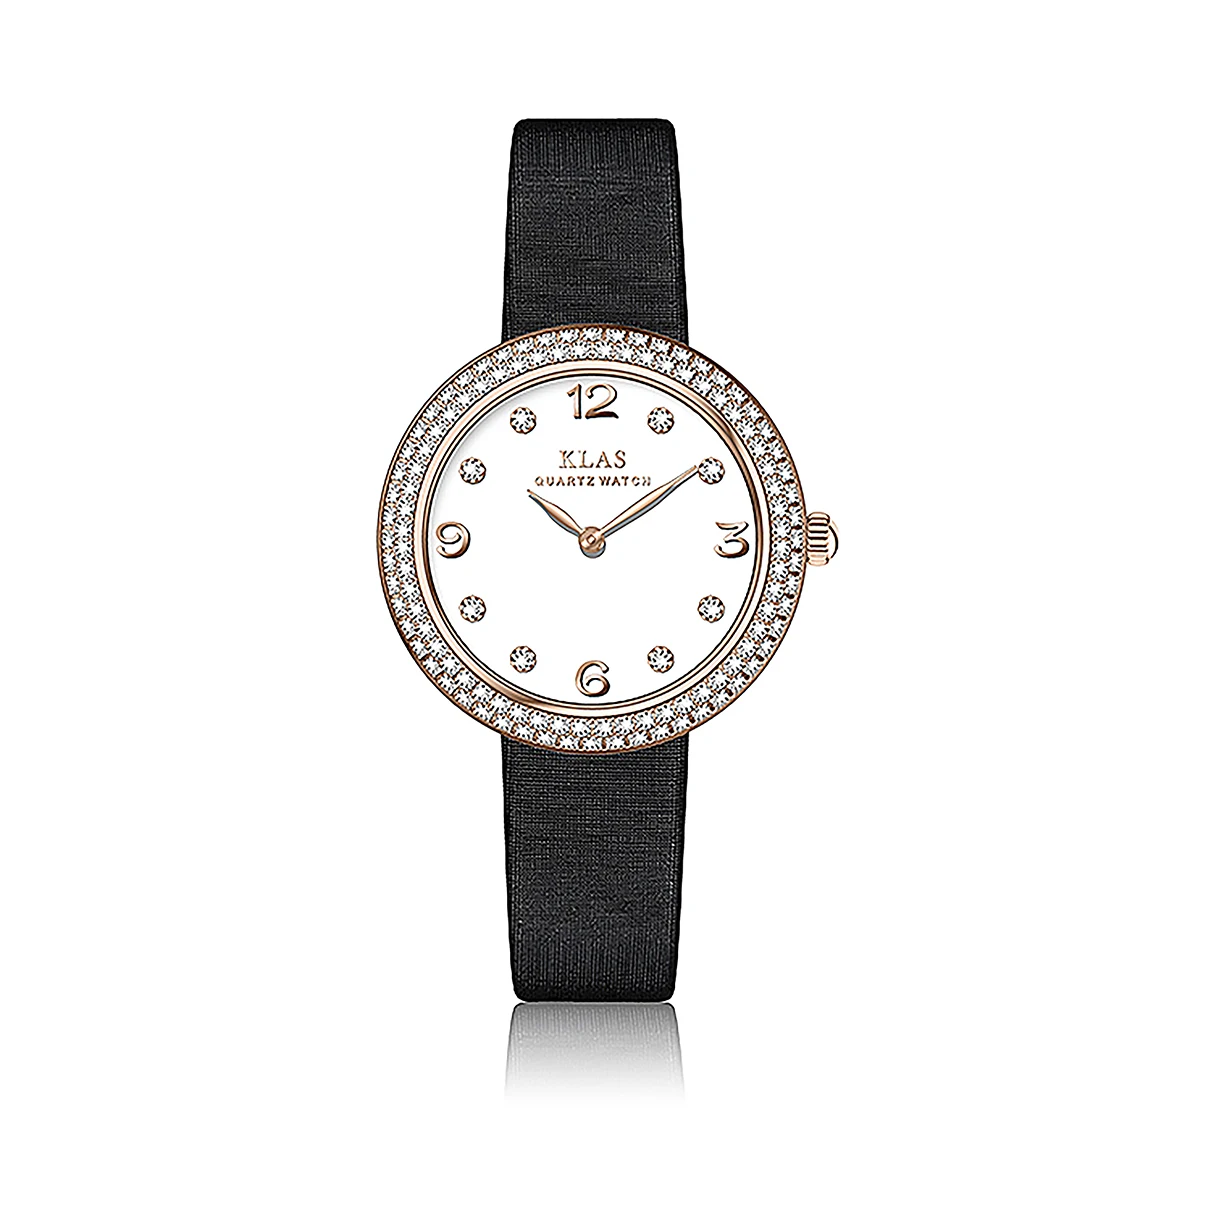 Simple and fashionable temperament for women watch  KLAS Brand